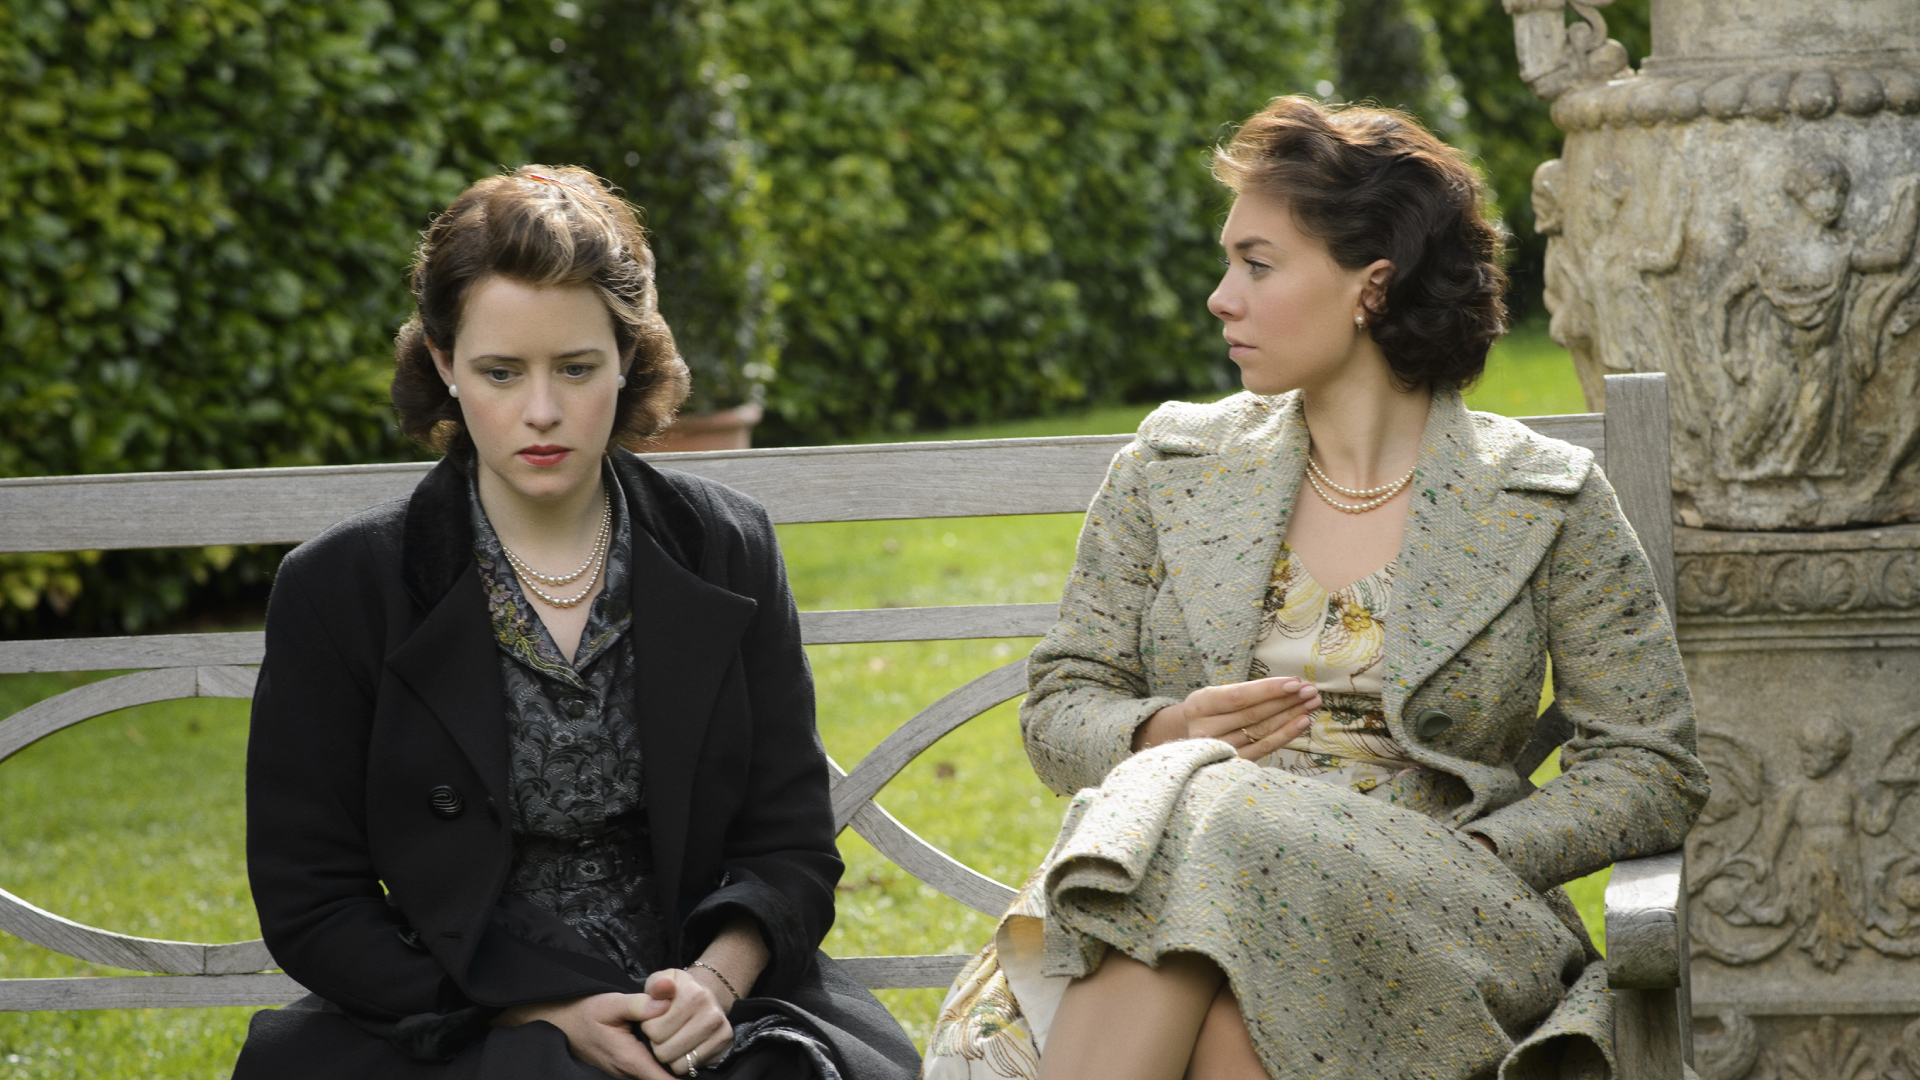 Claire Foy Returns to 'The Crown' Season 5, Charming Internet: 'I Screamed